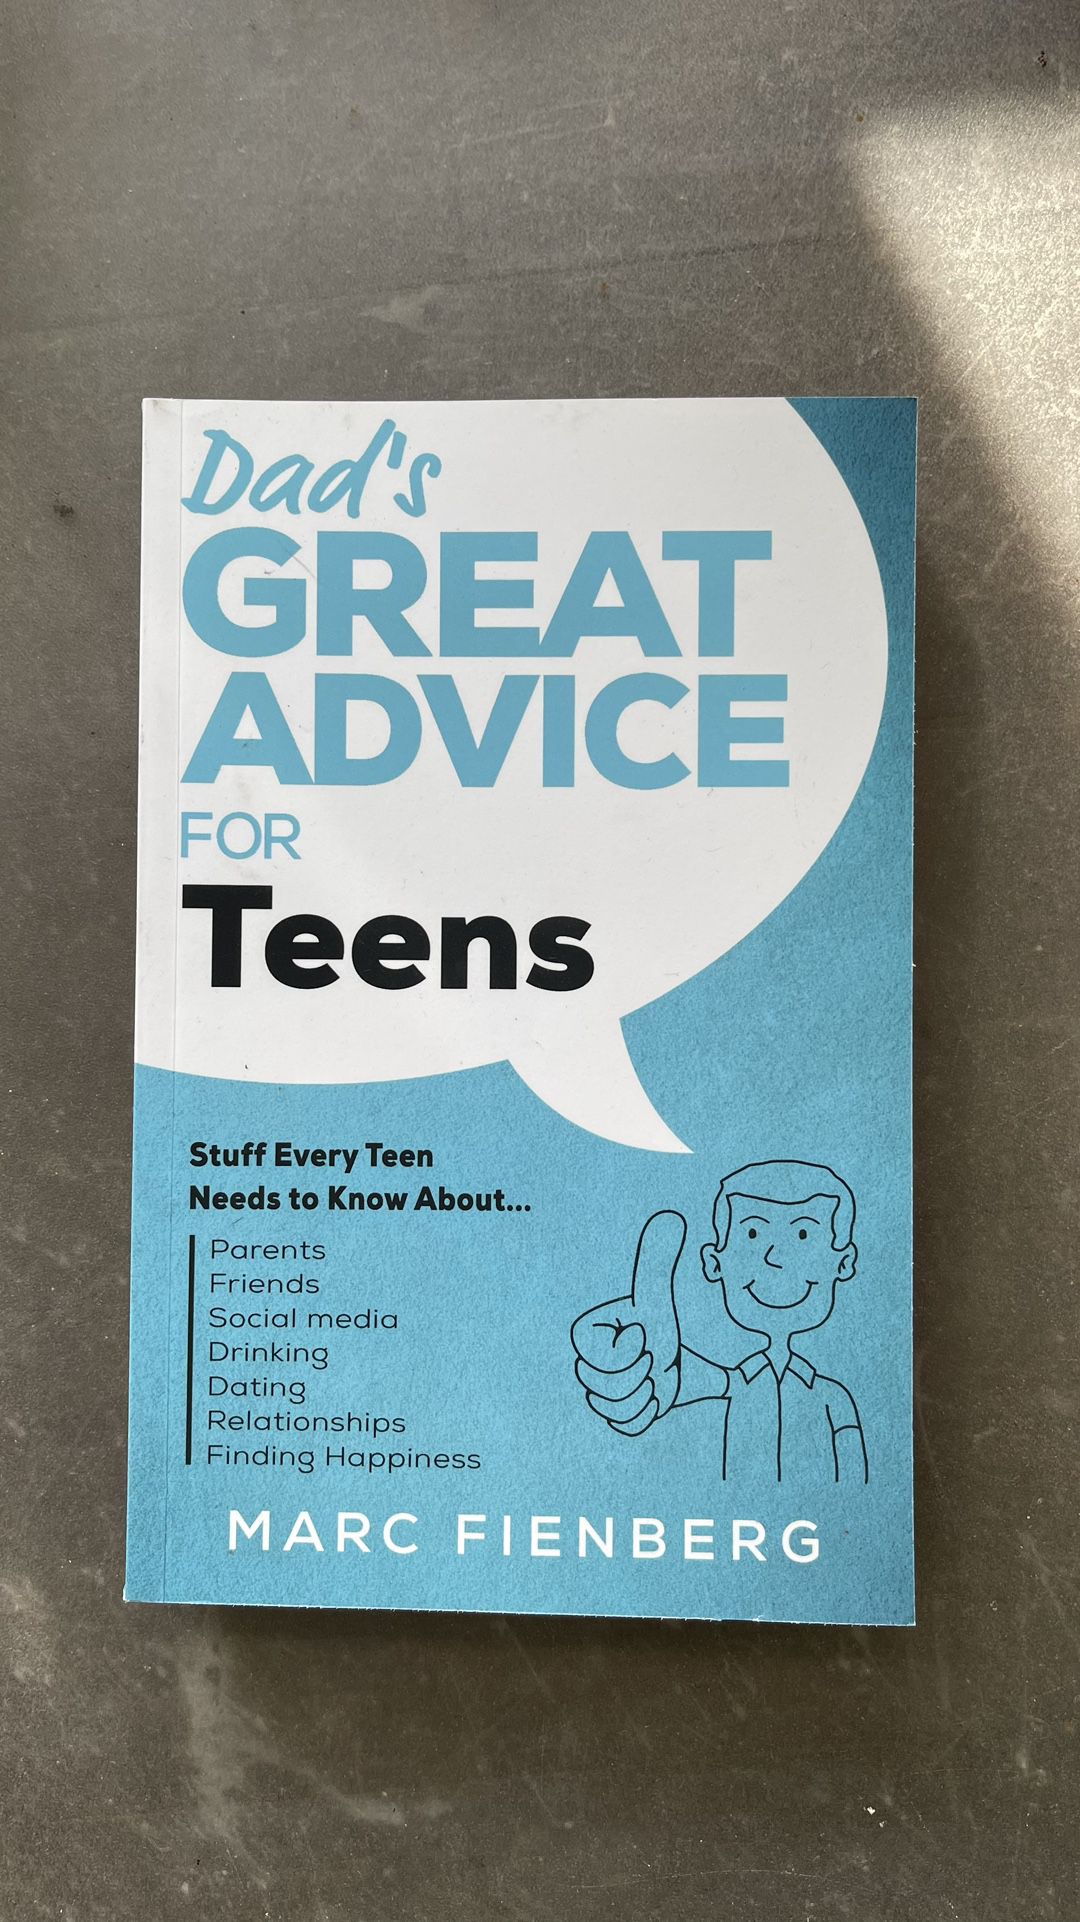 Great Dad’s Advice  & Easy Spanish Phrases Book